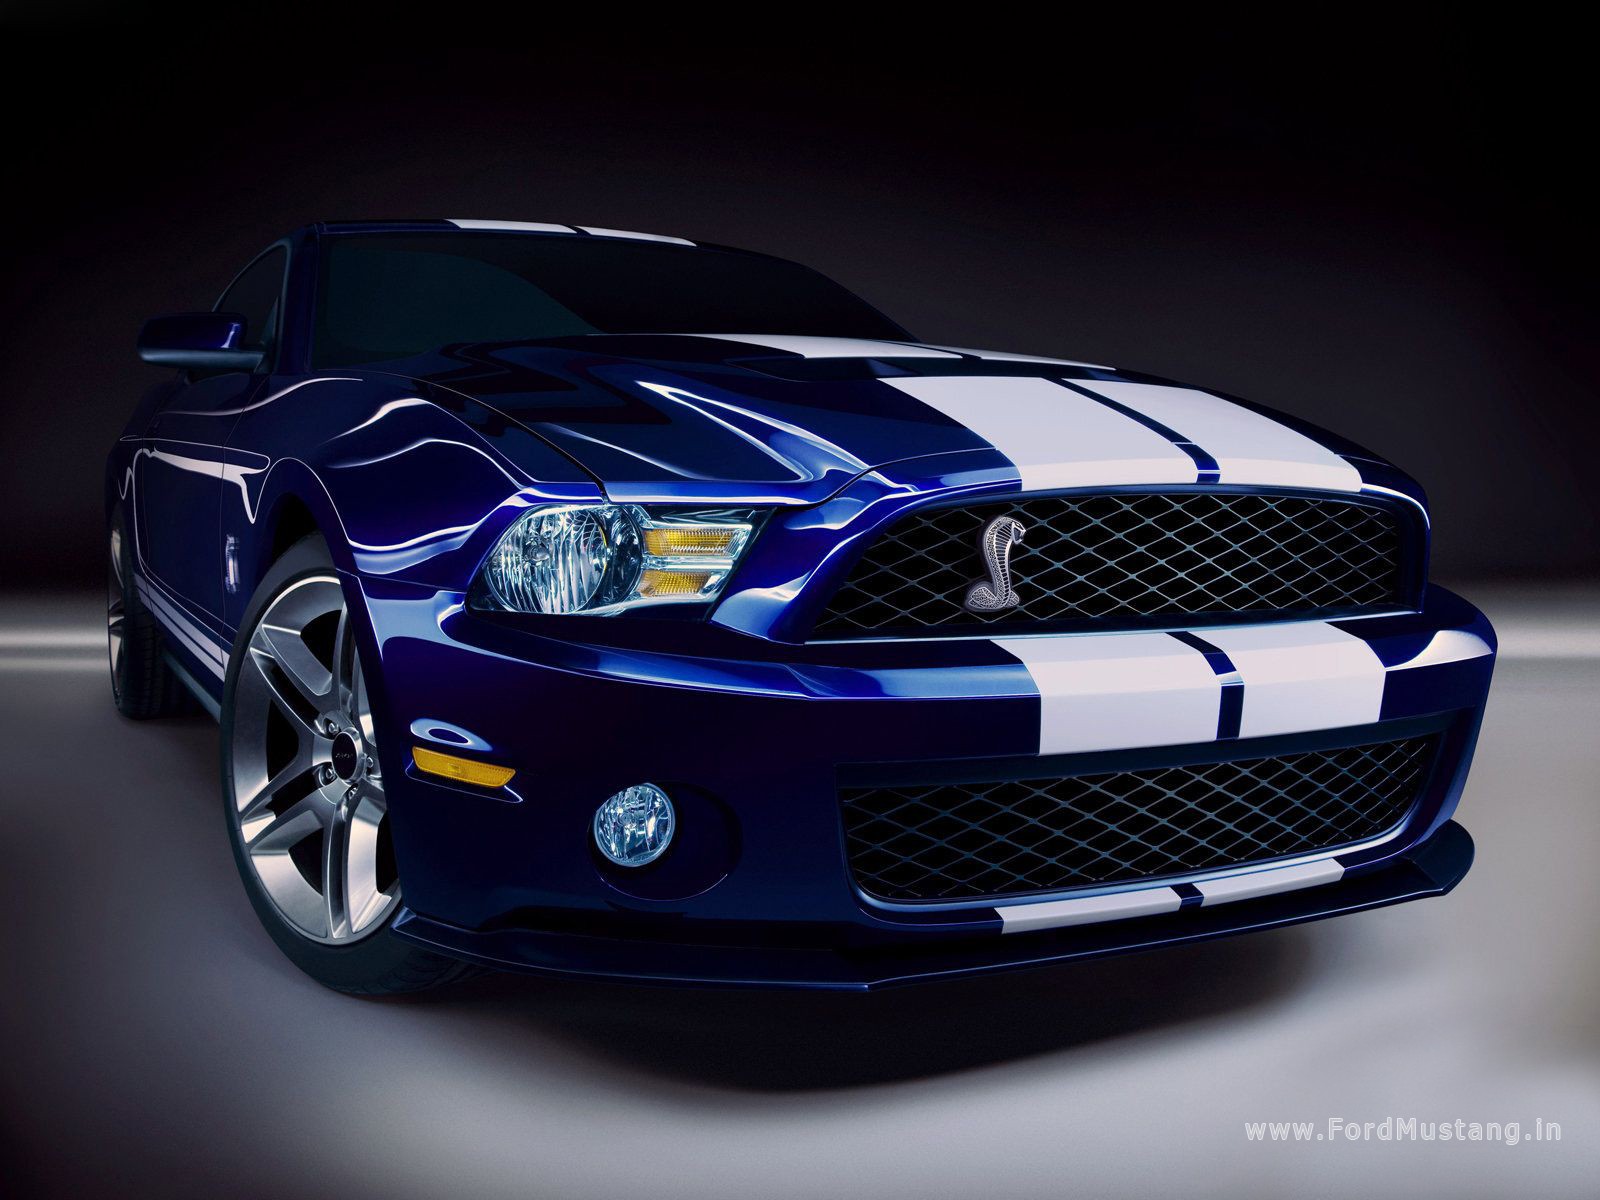 Ford Mustang Shelby Gt500 Wallpaper Best Wall Papers With